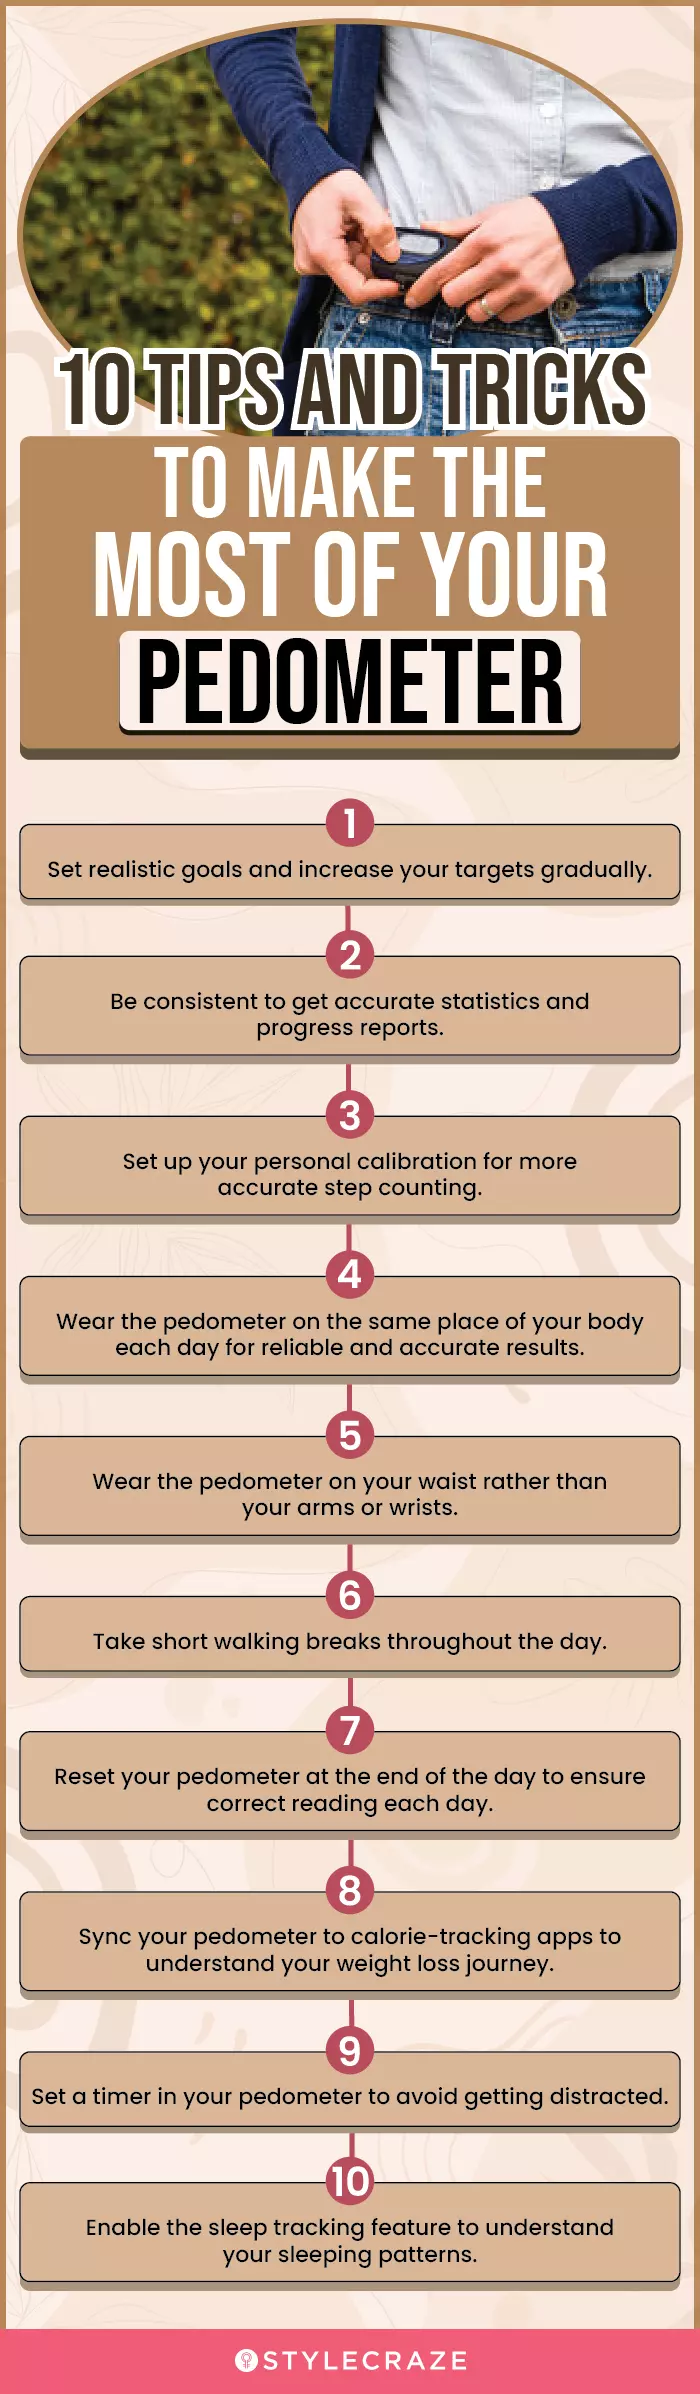 10 Tips And Tricks To Make The Most Of Your Pedometer (infographic)